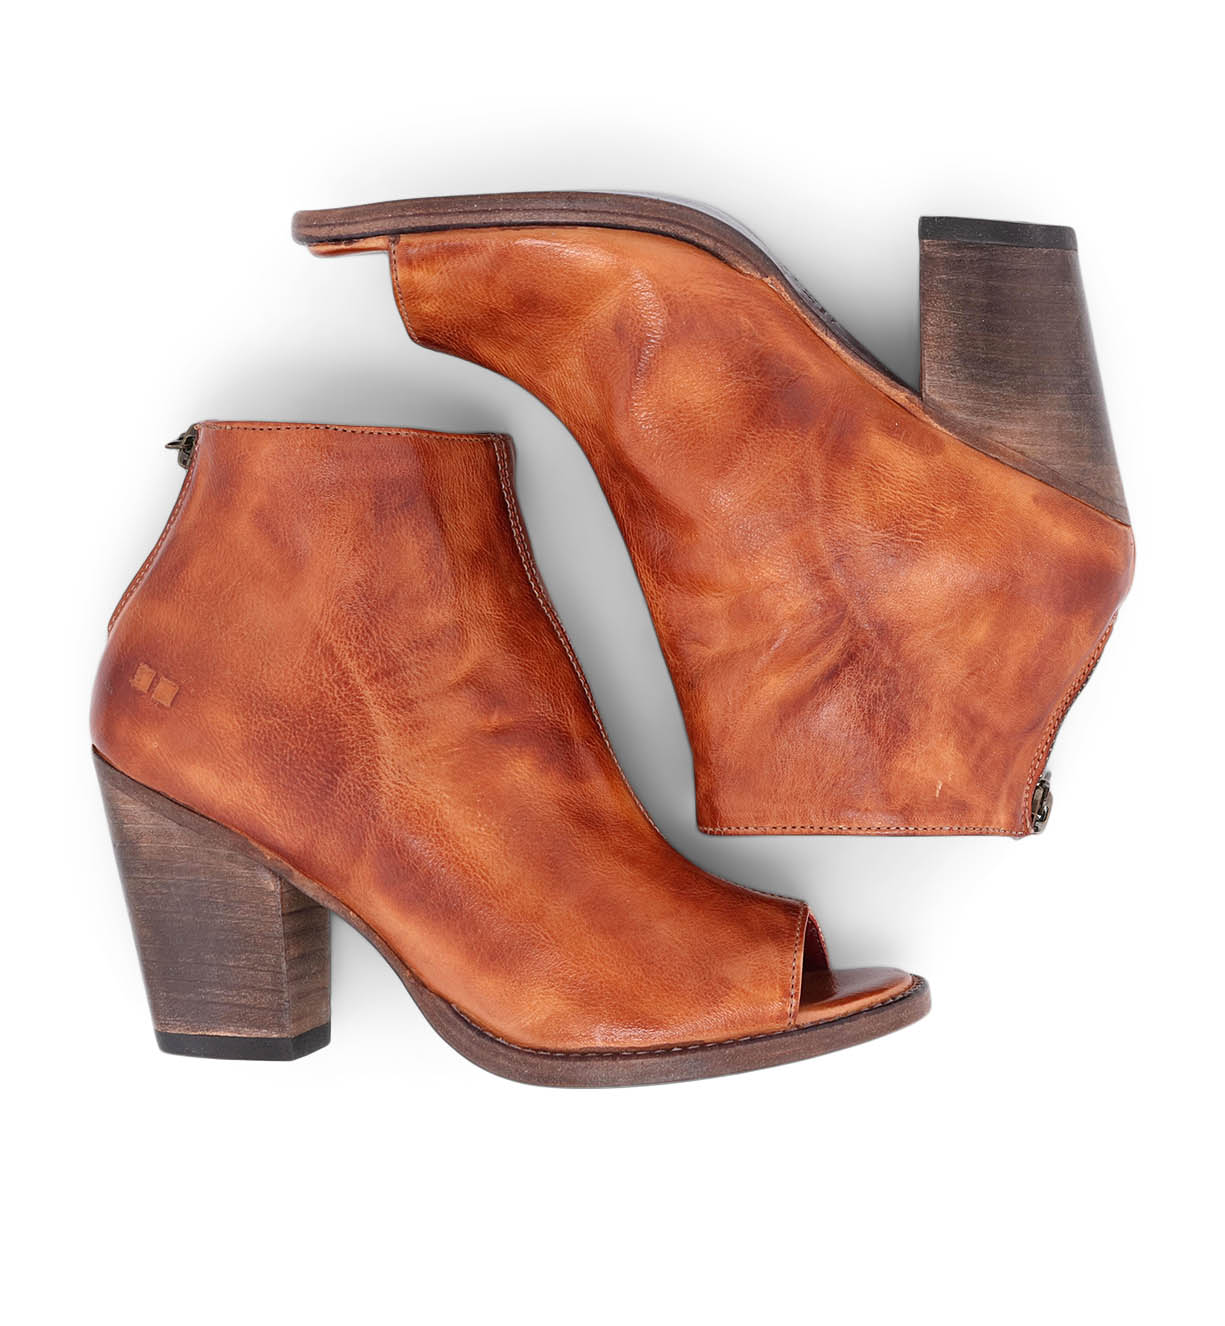 A pair of Bed Stu Onset tan leather ankle boots with a wooden heel.